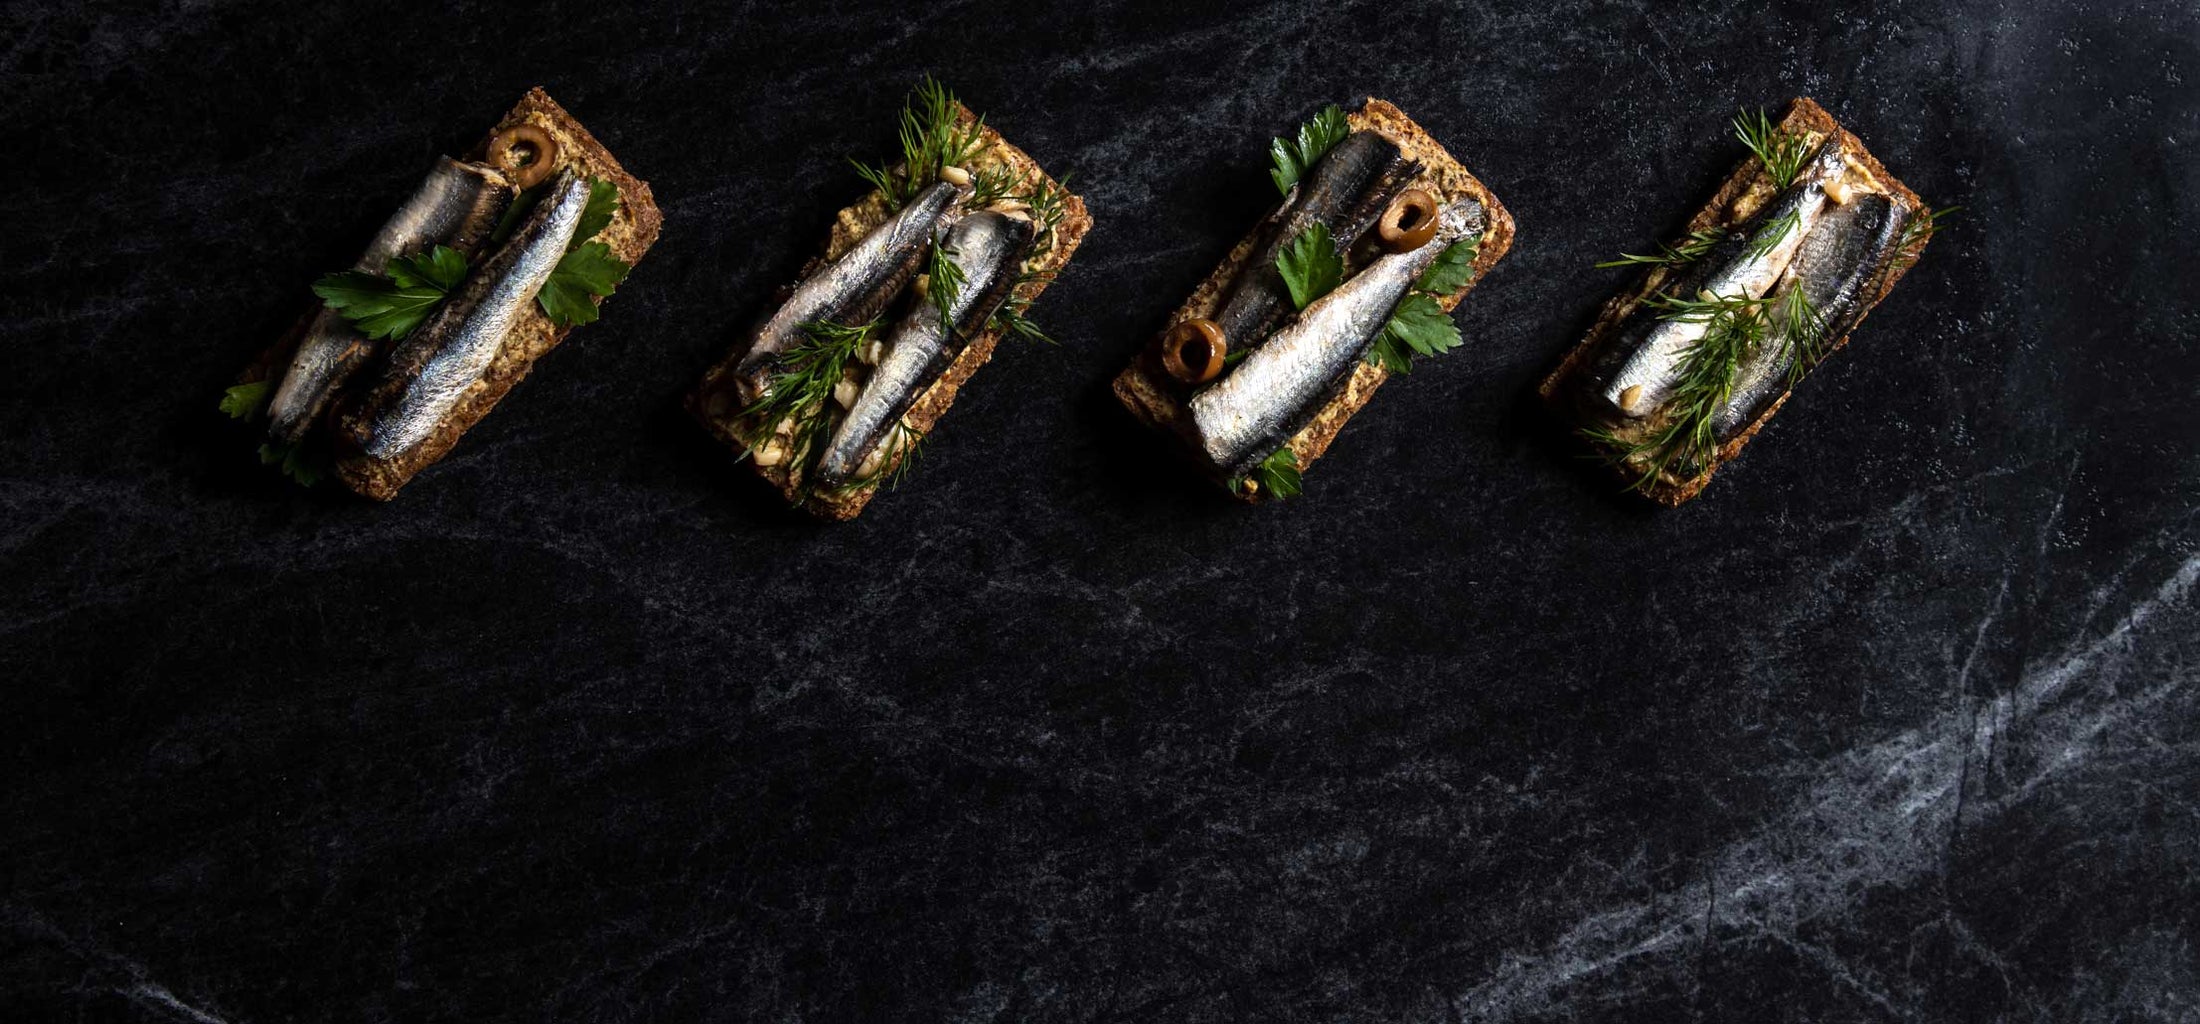 A row of toasts topped with slices of Spanish White Anchovies, herbs, and olives, on a dark stone tabletop